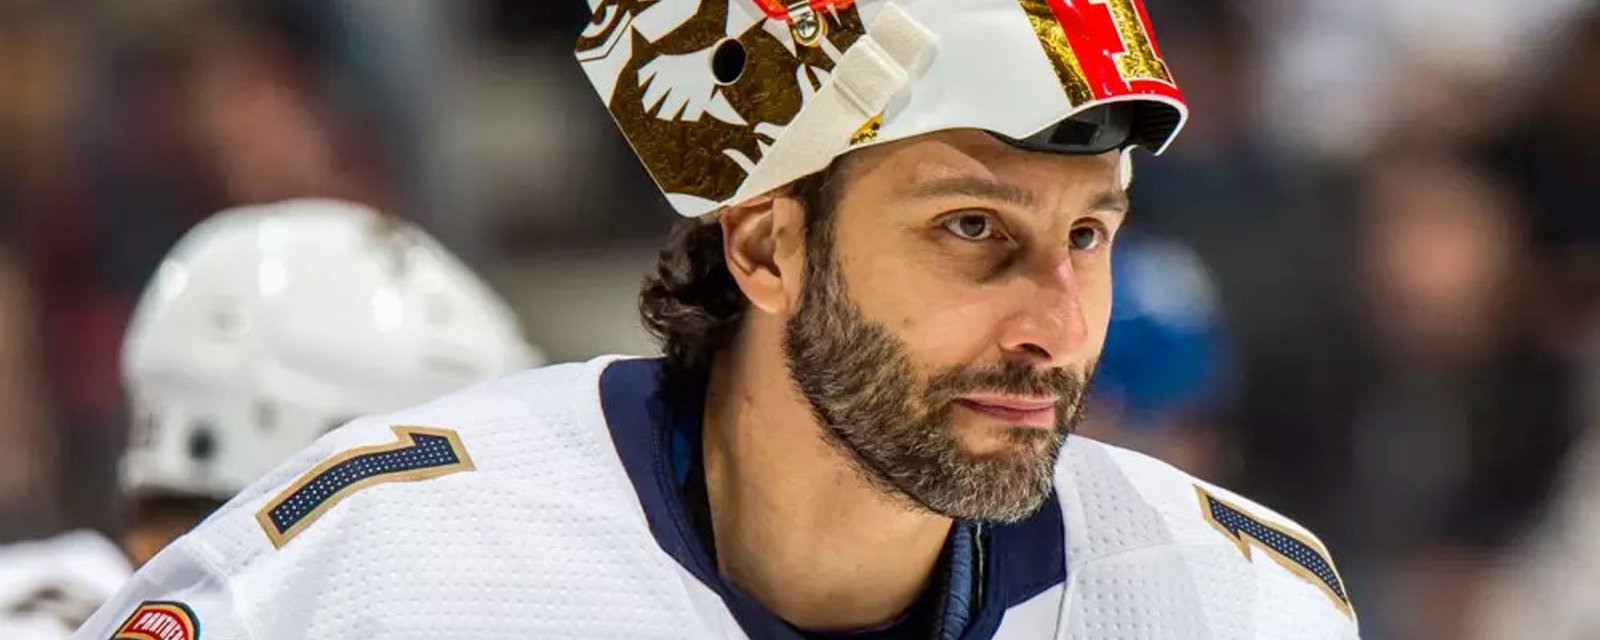 Luongo offers hilarious advice to parents who plan on stealing Halloween candy from their kids